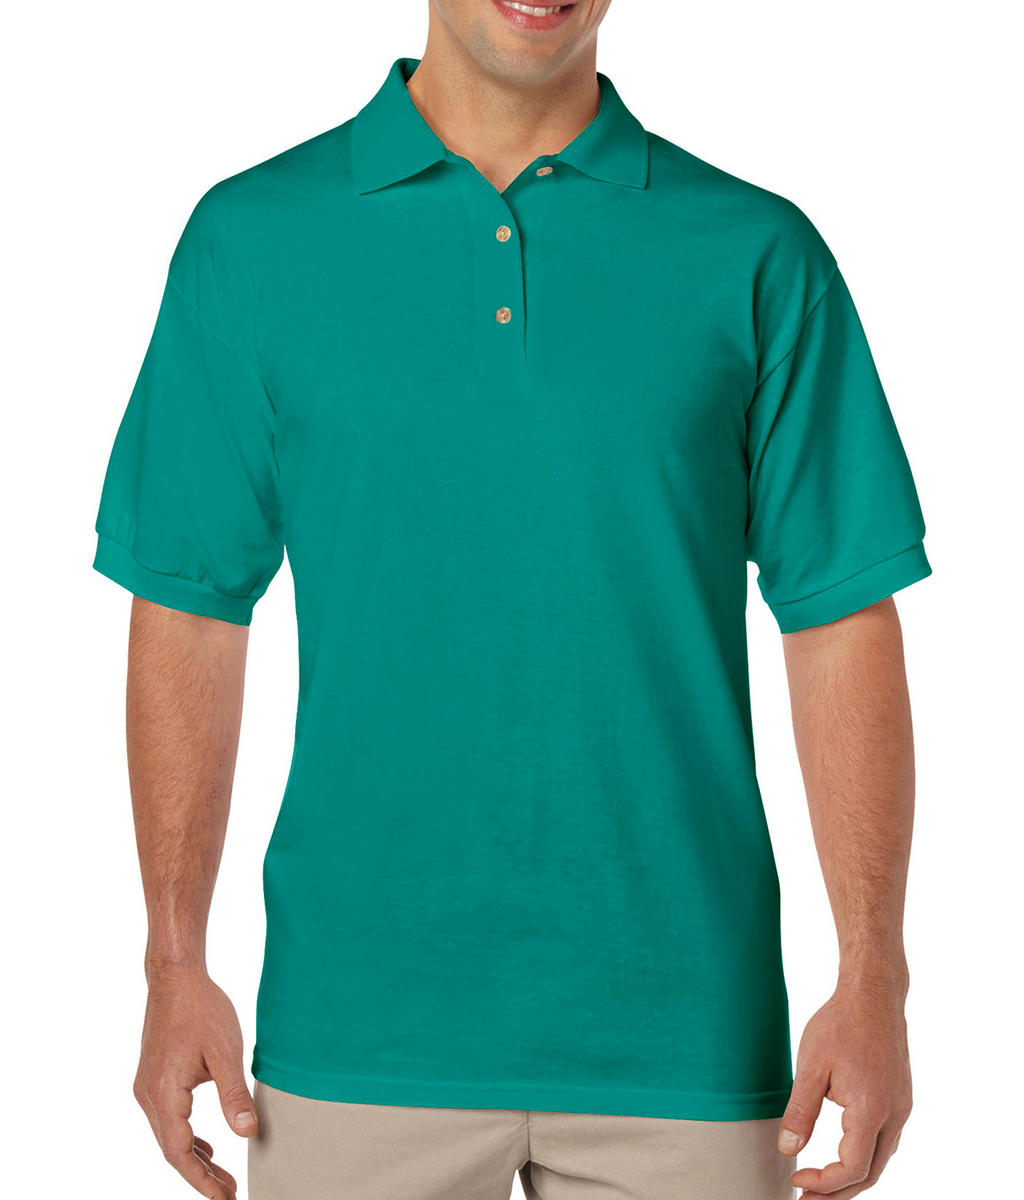  DryBlend Adult Jersey Polo in Farbe Jade Dome